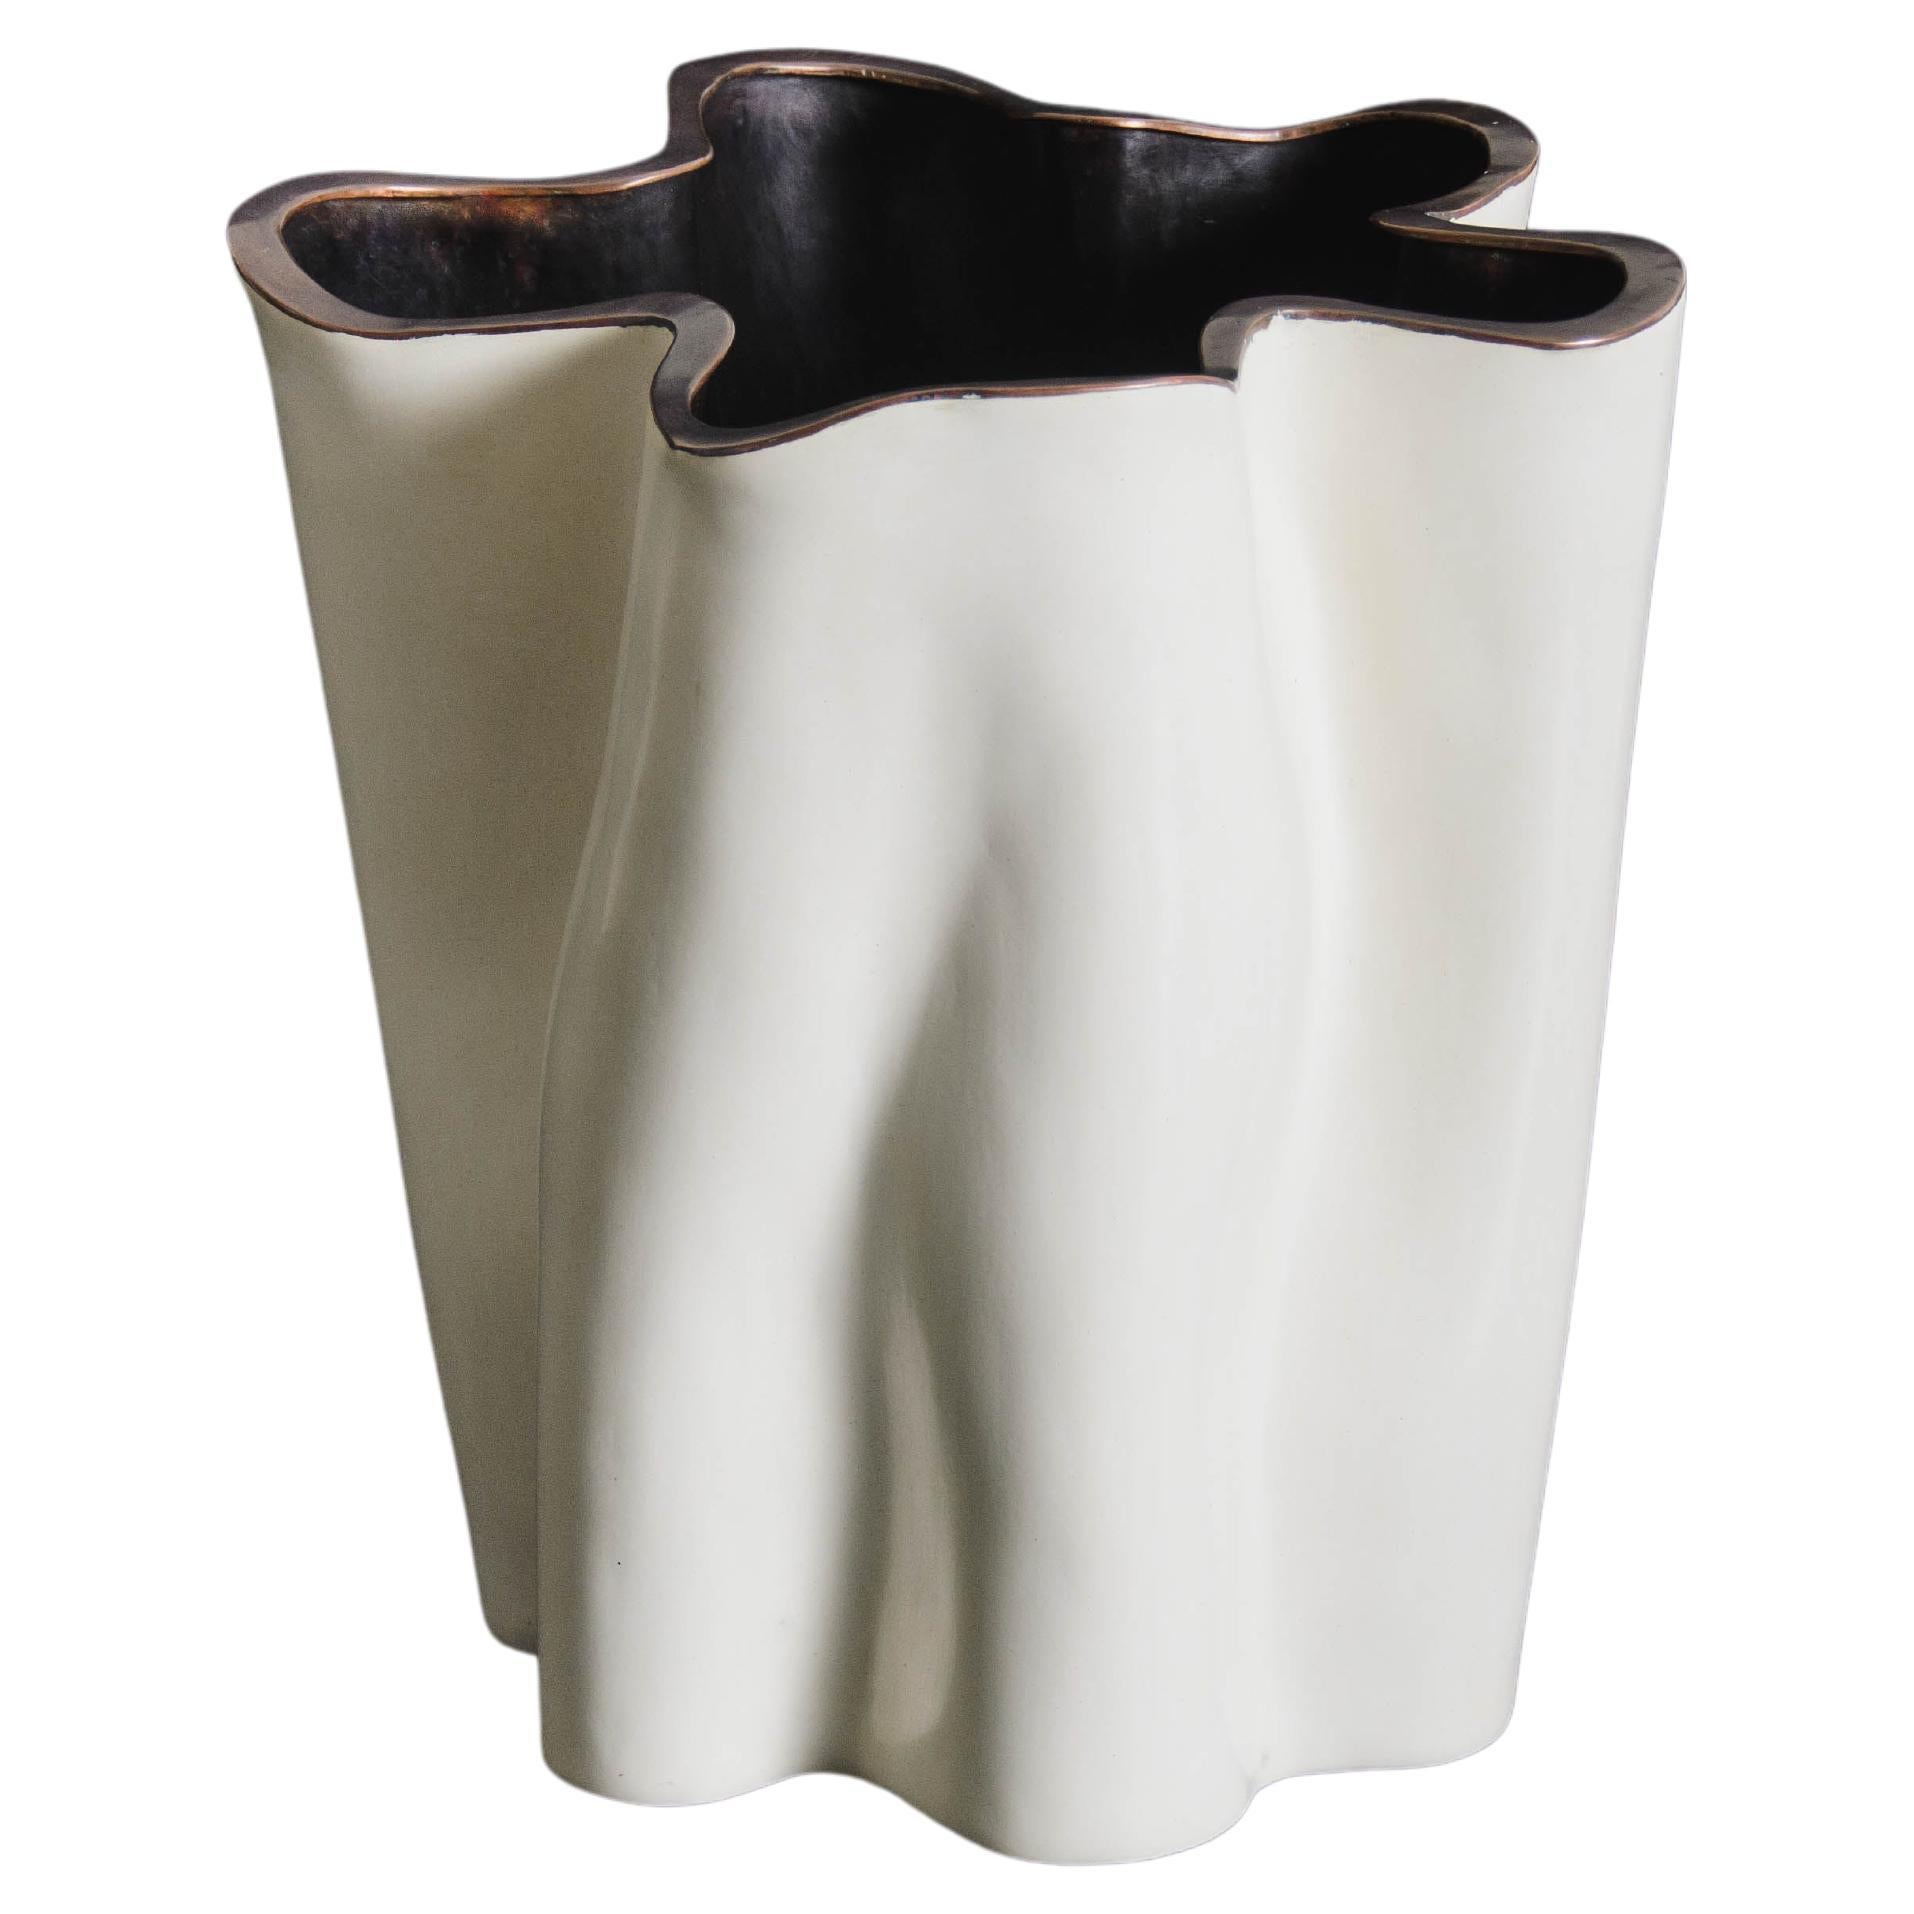 Contemporary Hand Repoussé Ji Guan Hua Vase in Cream Lacquer by Robert Kuo For Sale